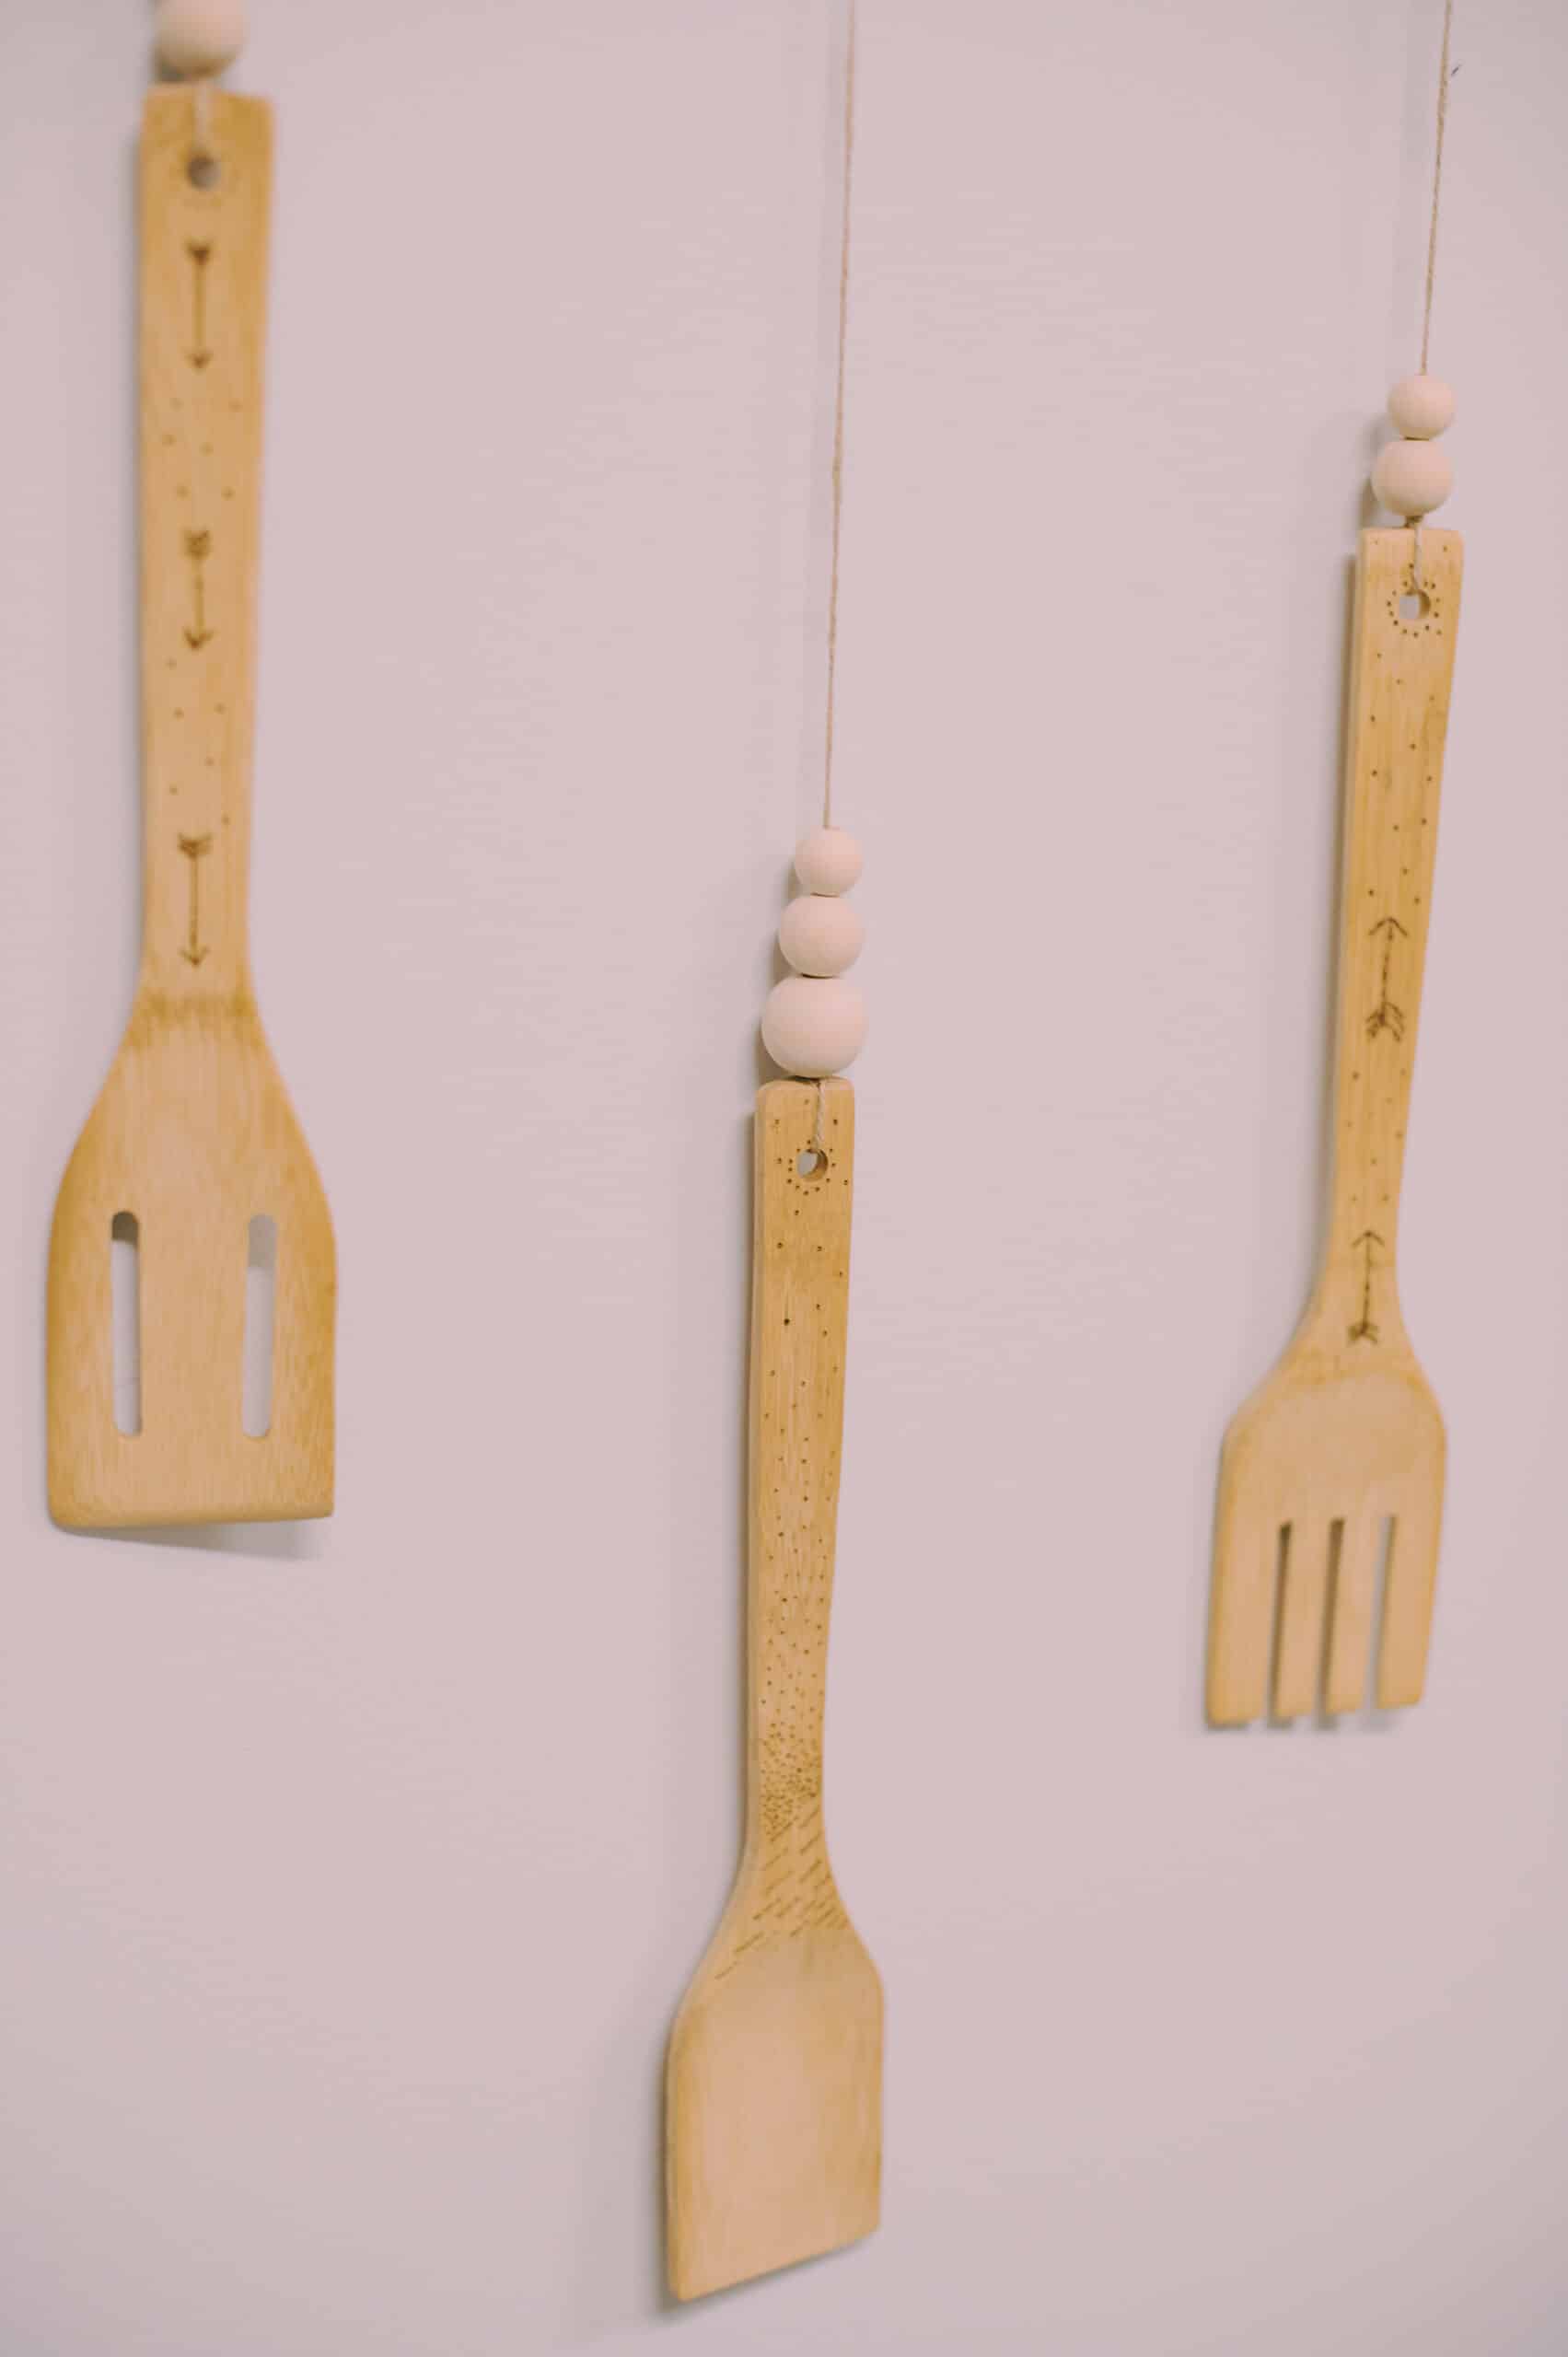 Learn how to make a DIY woodburned wooden utensil wall hanging out of wood kitchen spoons by woodburning dots and arrows!